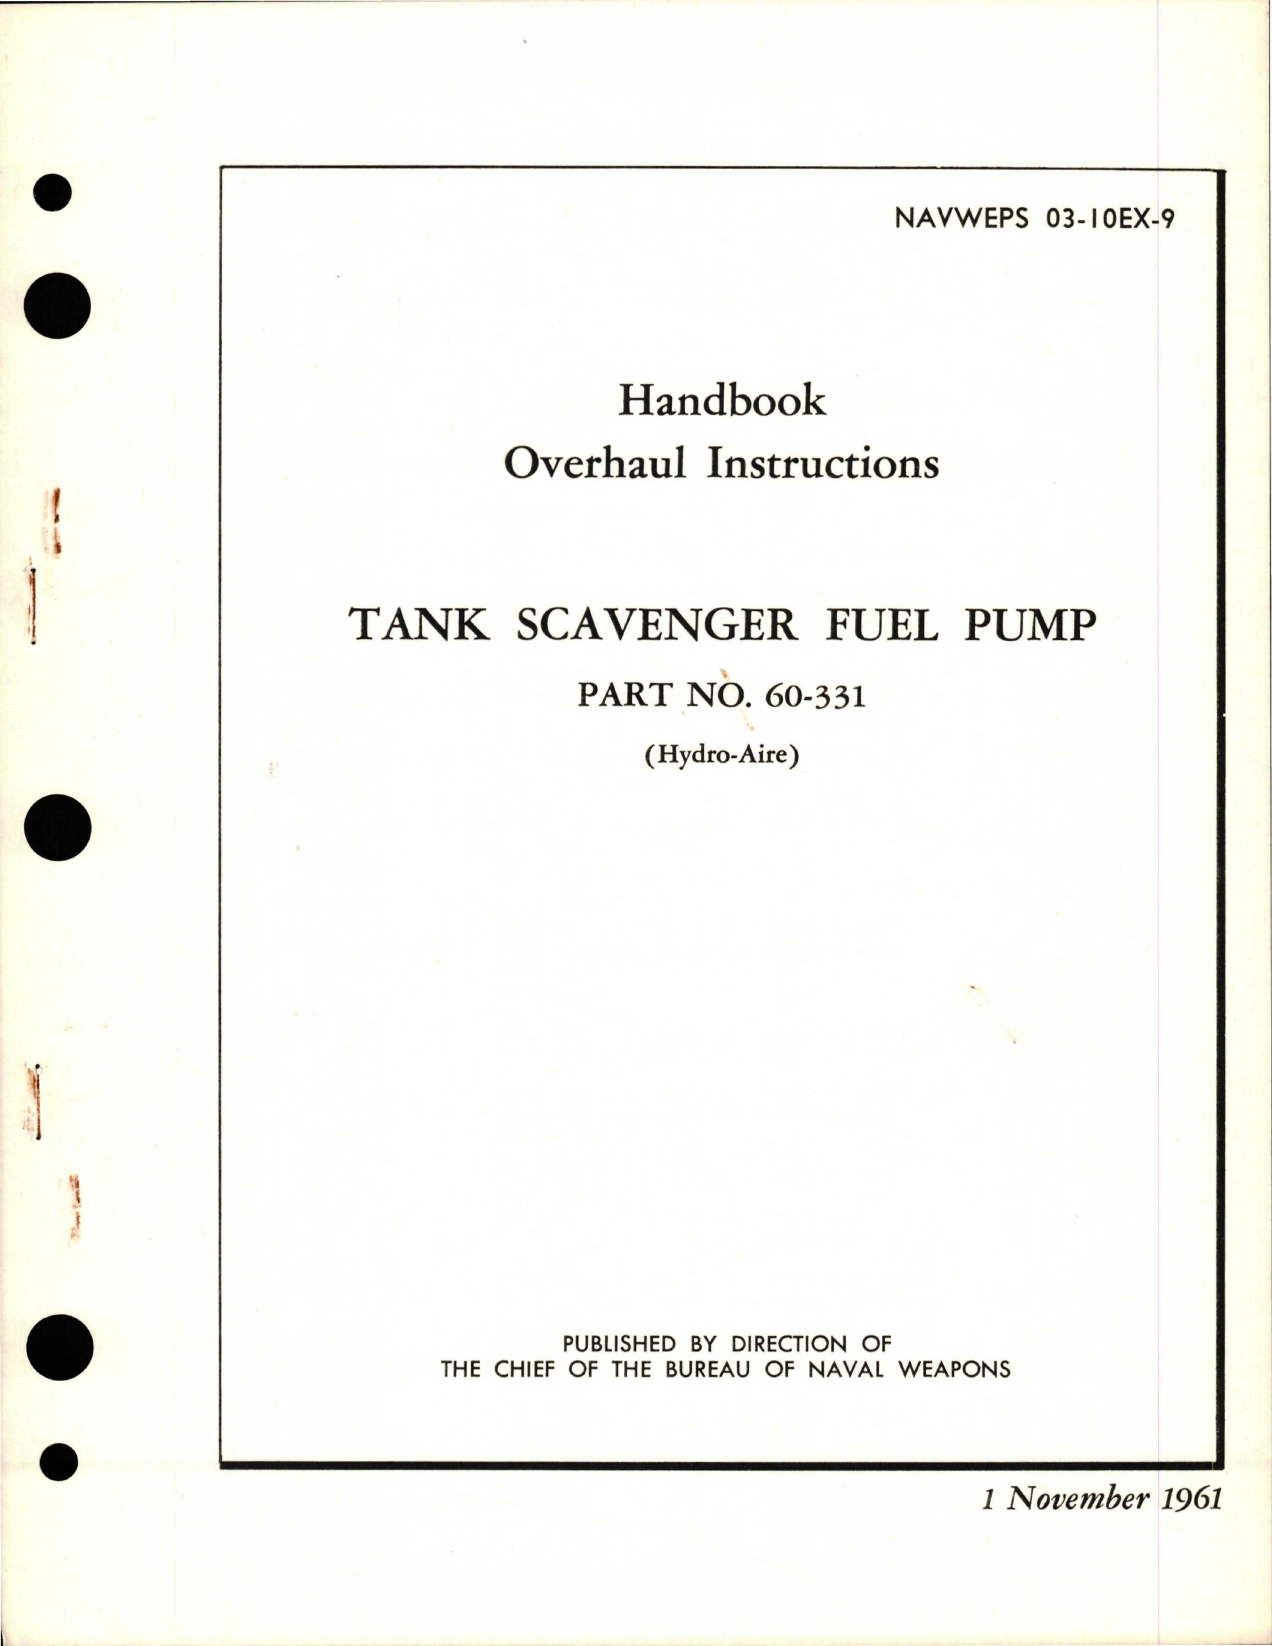 Sample page 1 from AirCorps Library document: Overhaul Instructions for Tank Scavenger Fuel Pump - Part 60-331 